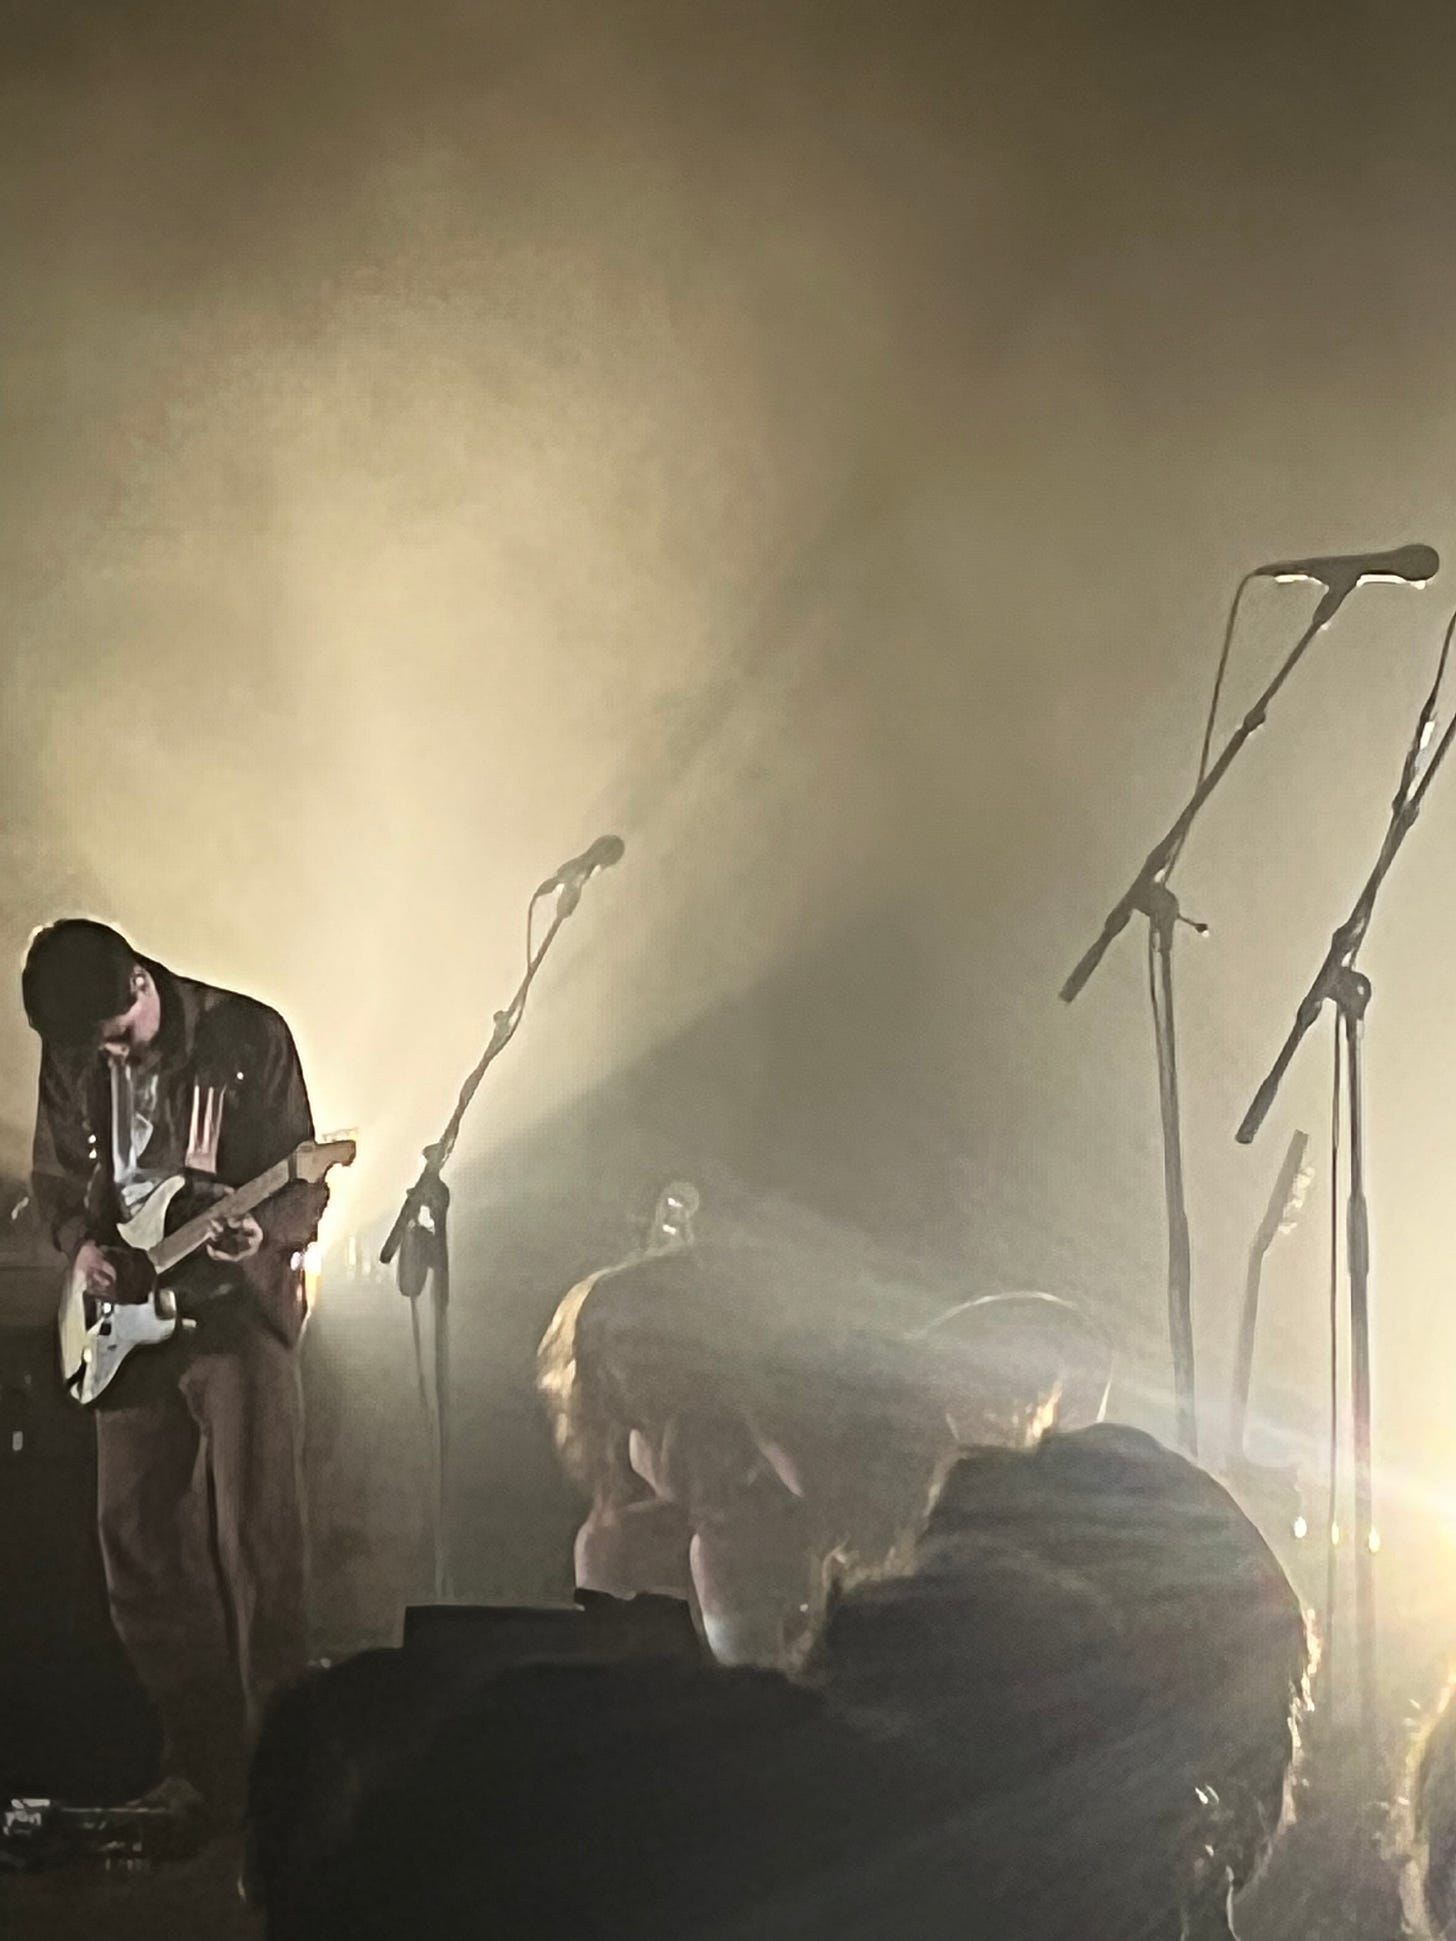 three microphones, one bas player and one sitting human surrounded by fog and murky light